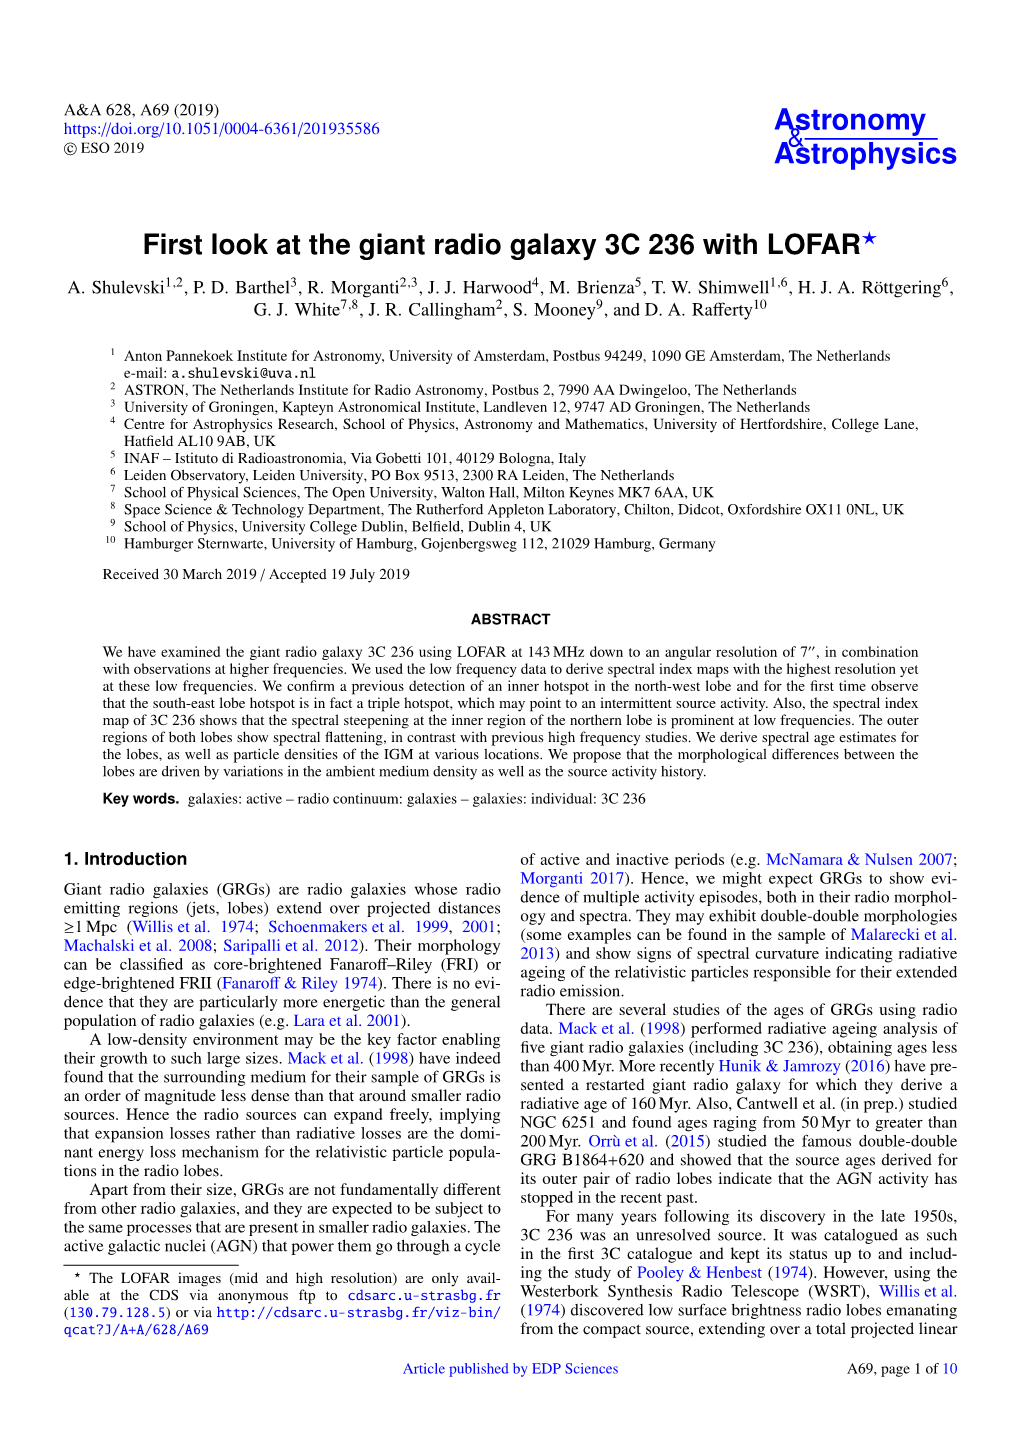 First Look at the Giant Radio Galaxy 3C 236 with LOFAR? A